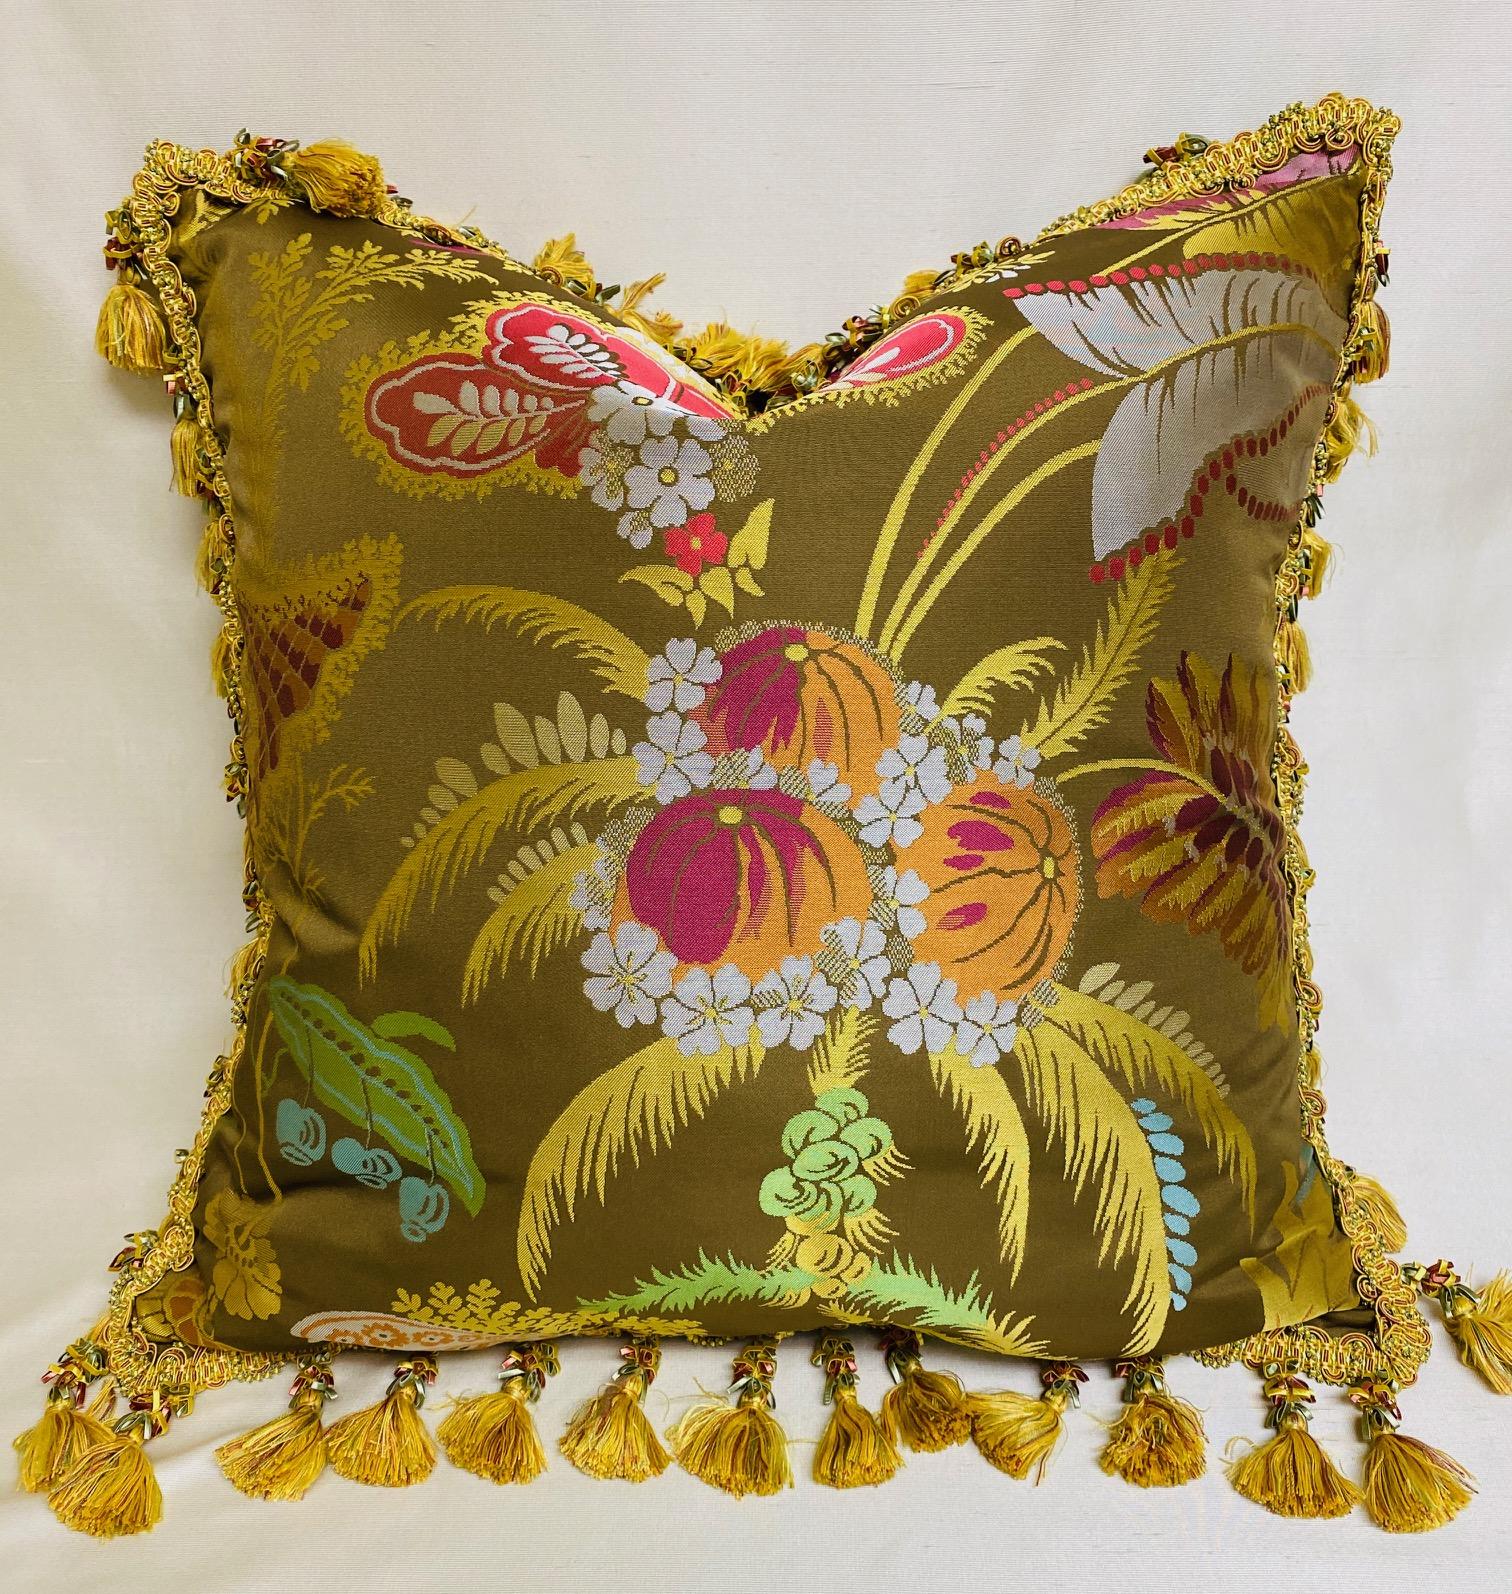 Fine and highly decorative pair of silk brocade cushions multicolored on taupe background with silk tassel fringe.
24